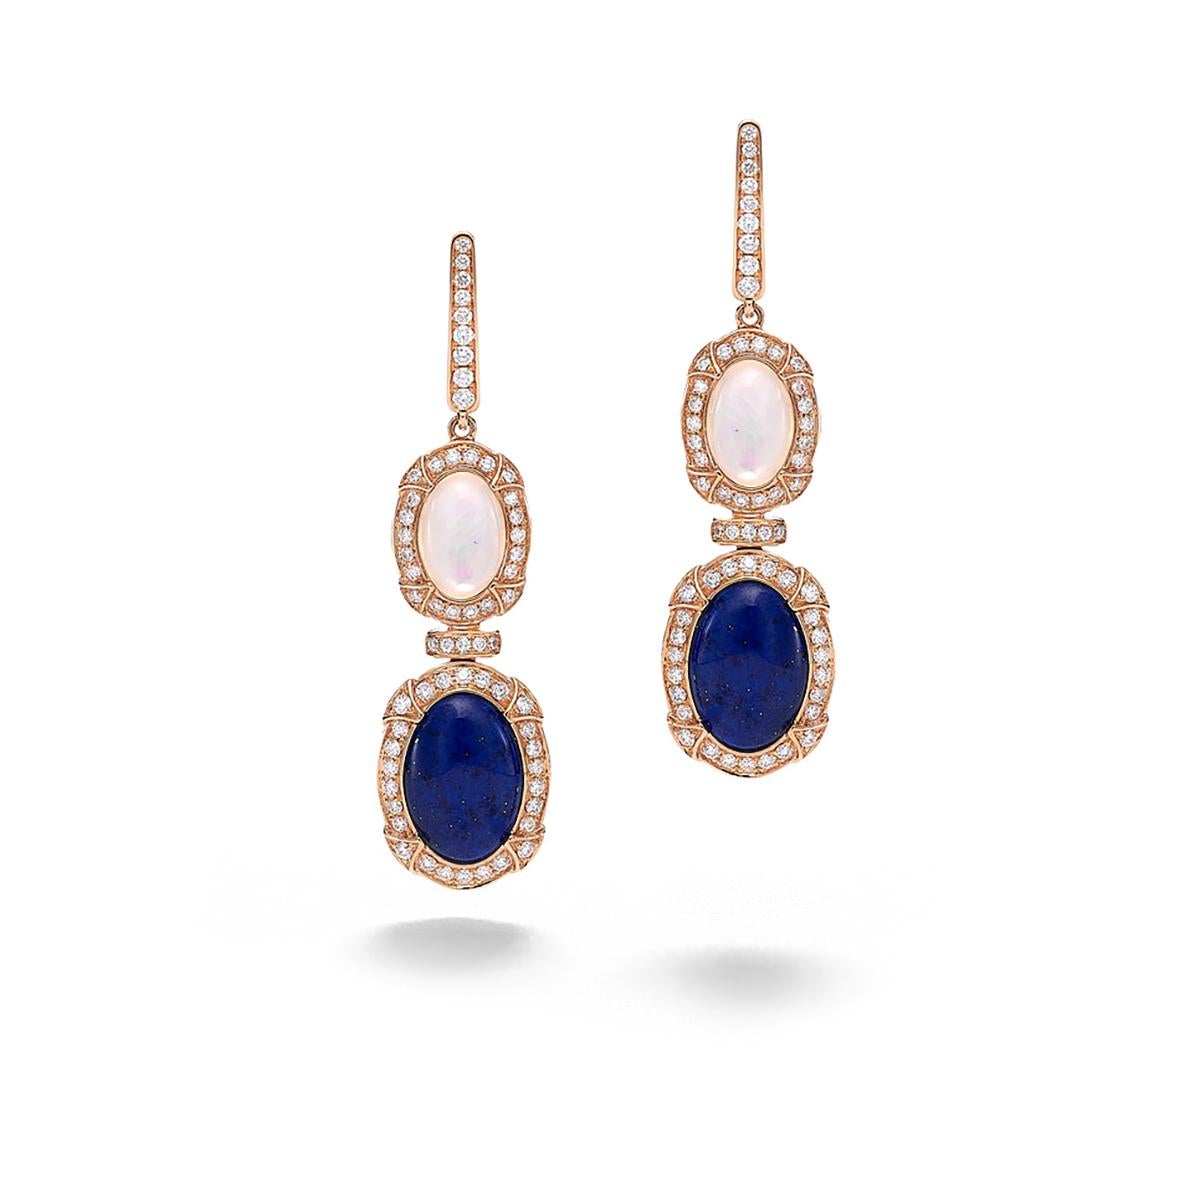 Contemporary Diamond Mother of Pearl and Lapis Lazuli Earrings